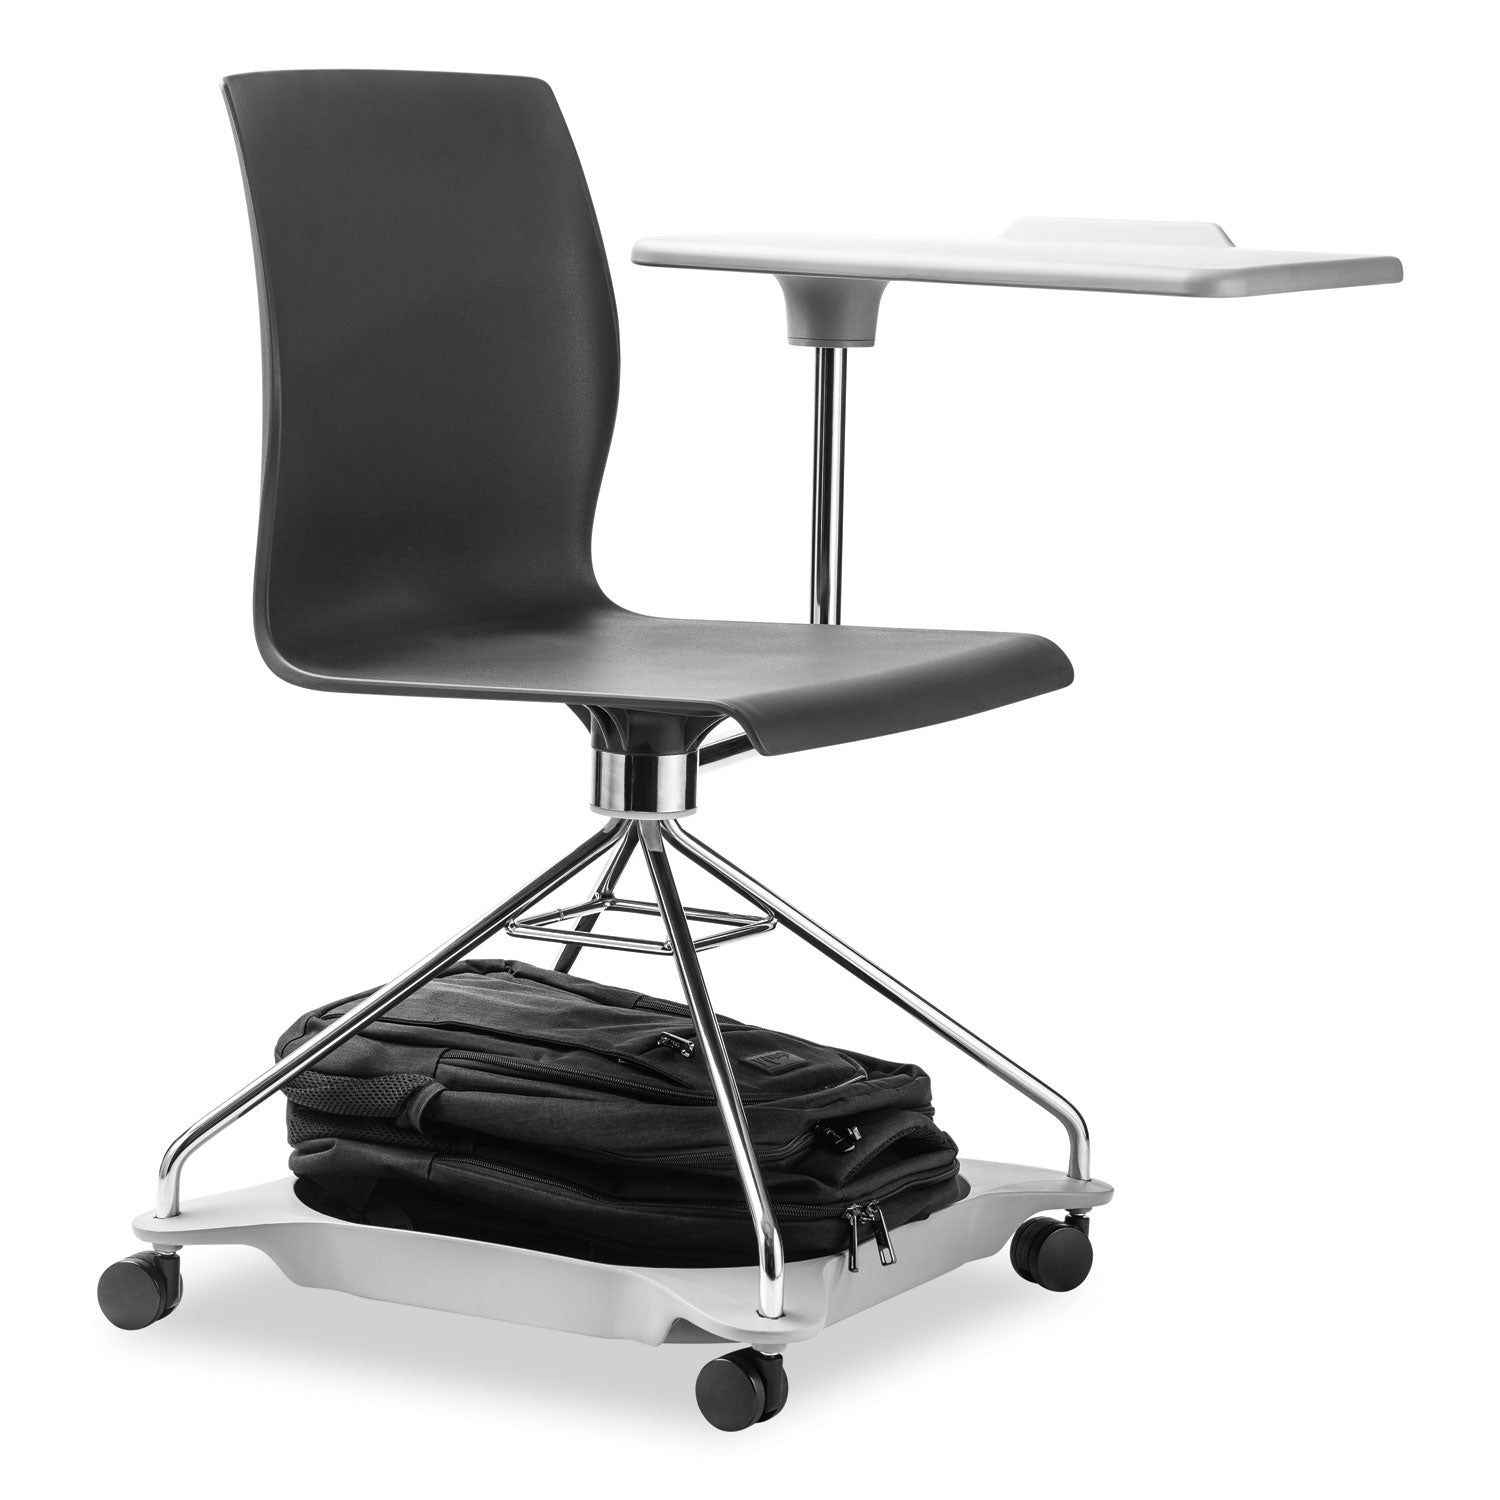 cogo-mobile-tablet-chair-supports-up-to-440-lb-1875-seat-height-black-seat-back-chrome-frameships-in-1-3-business-days_npscogo10 - 2